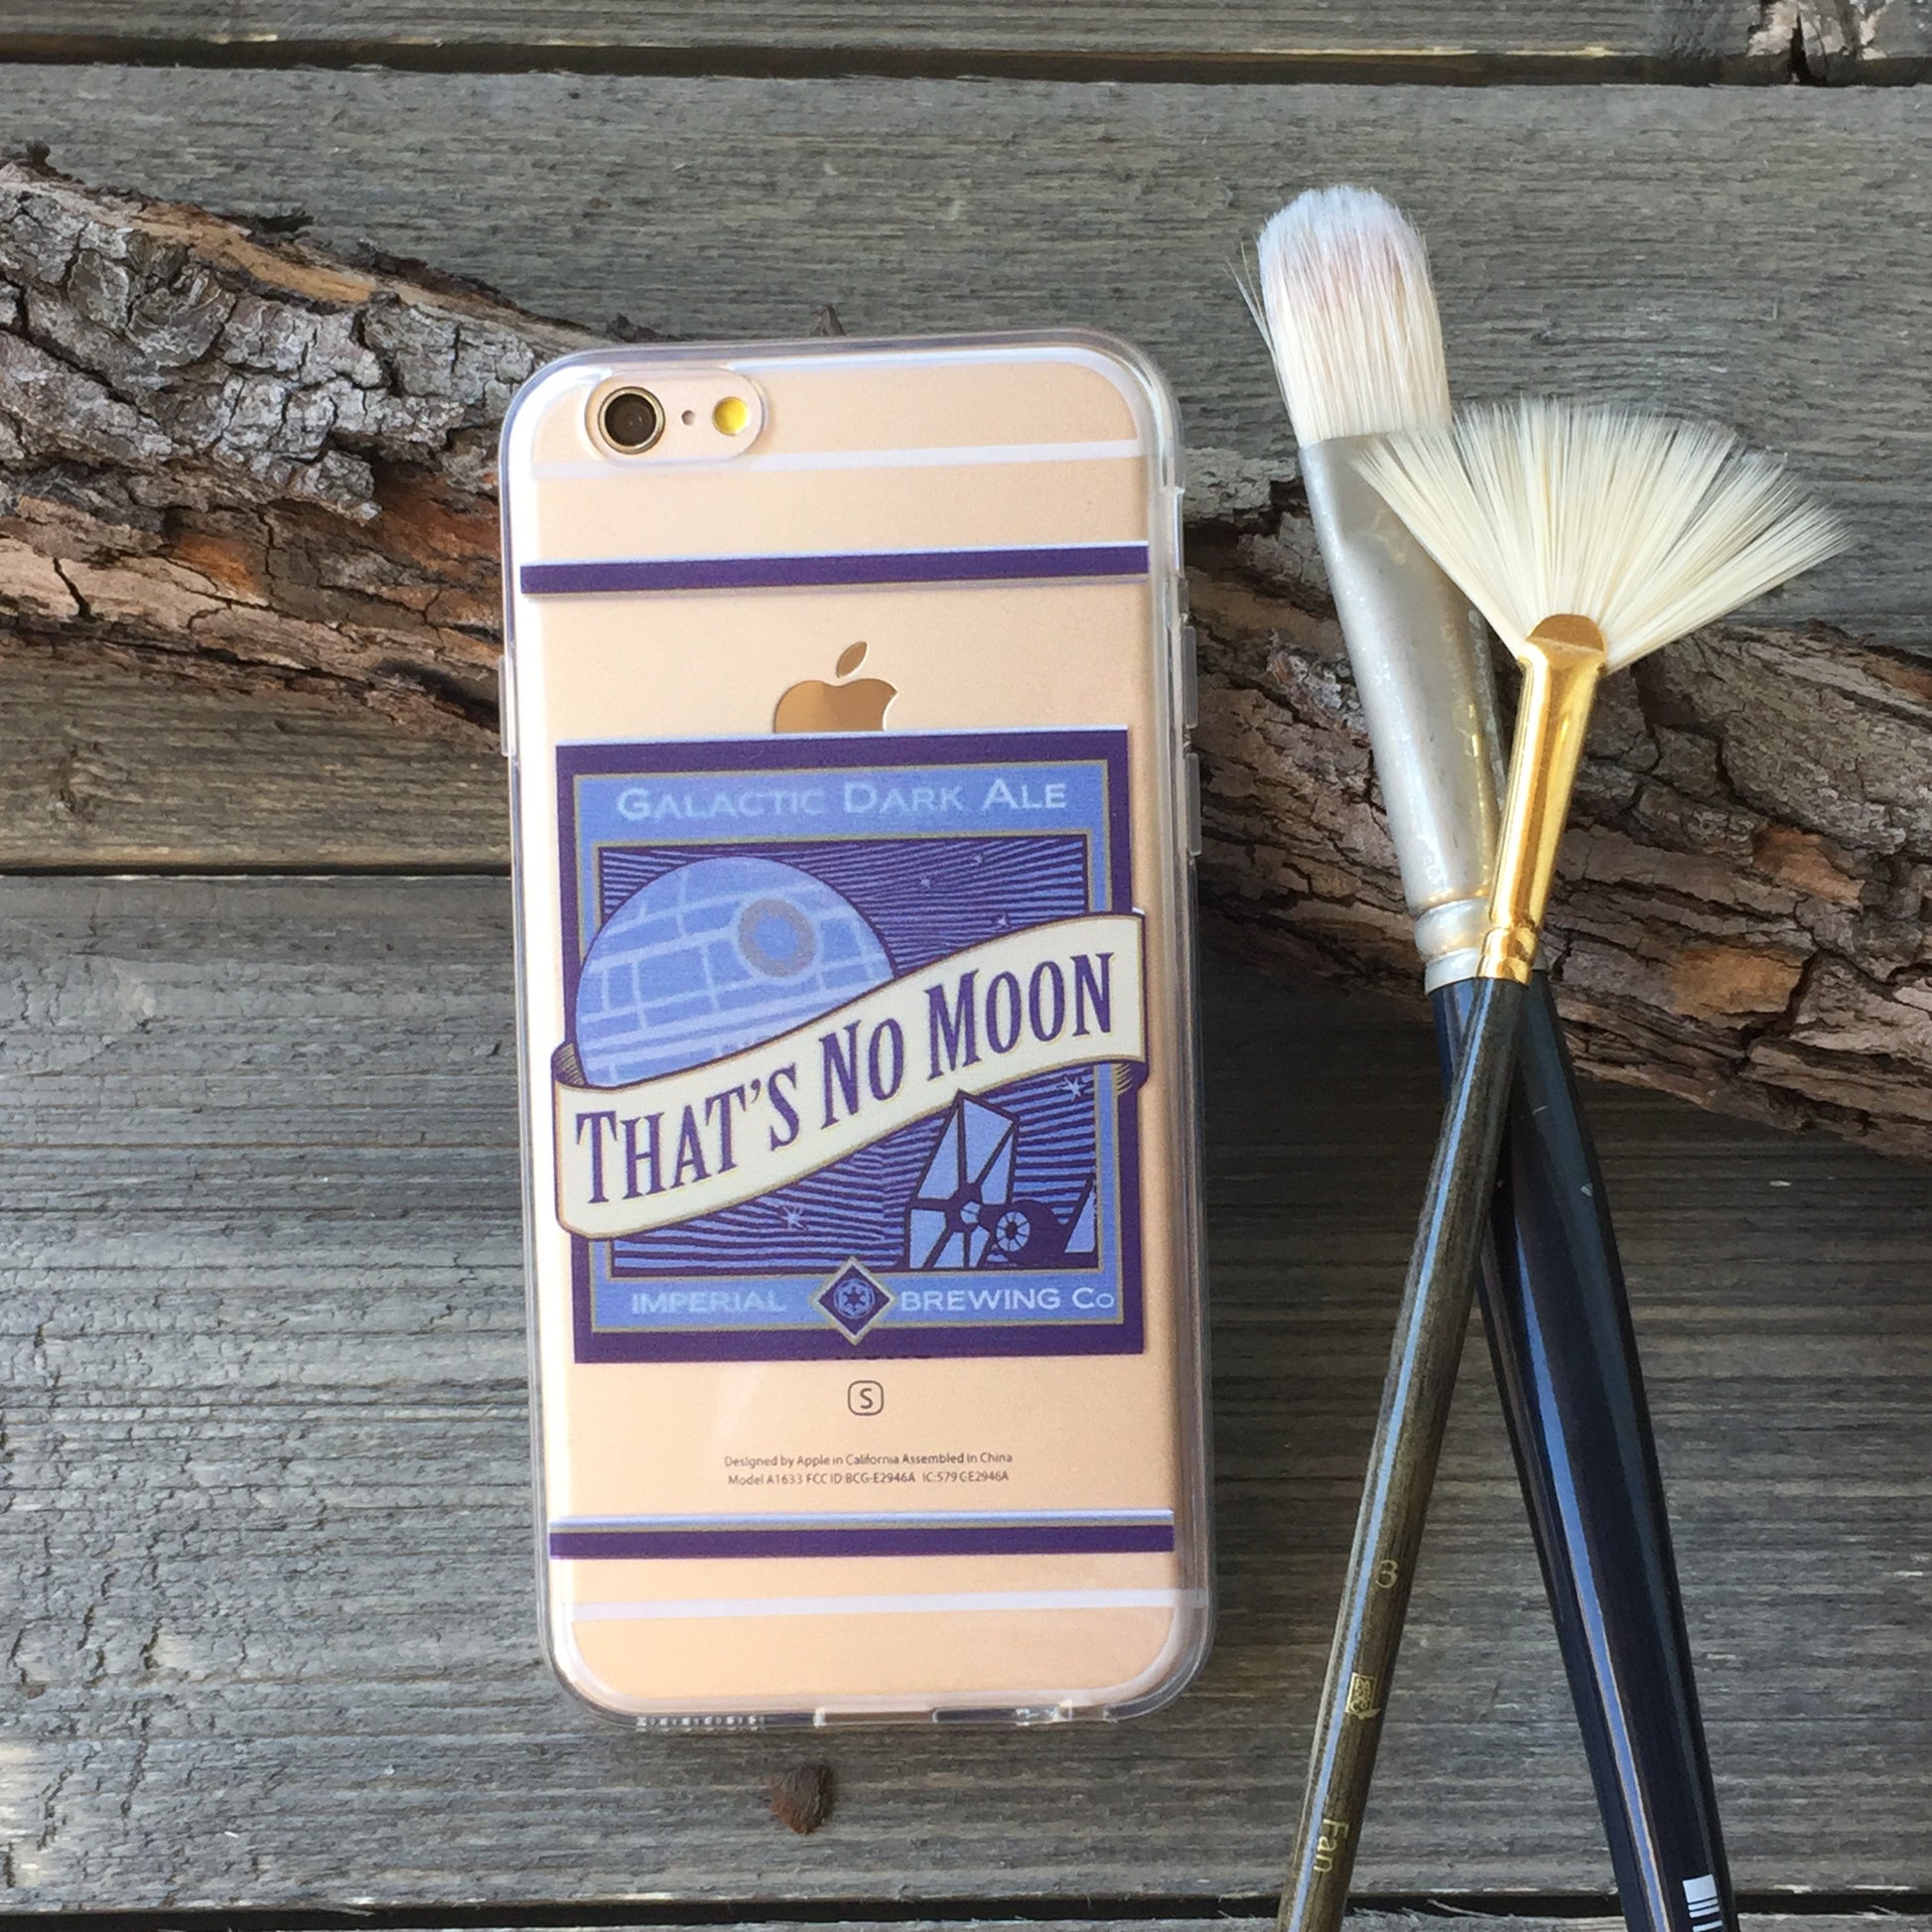 thats no moon iphone case